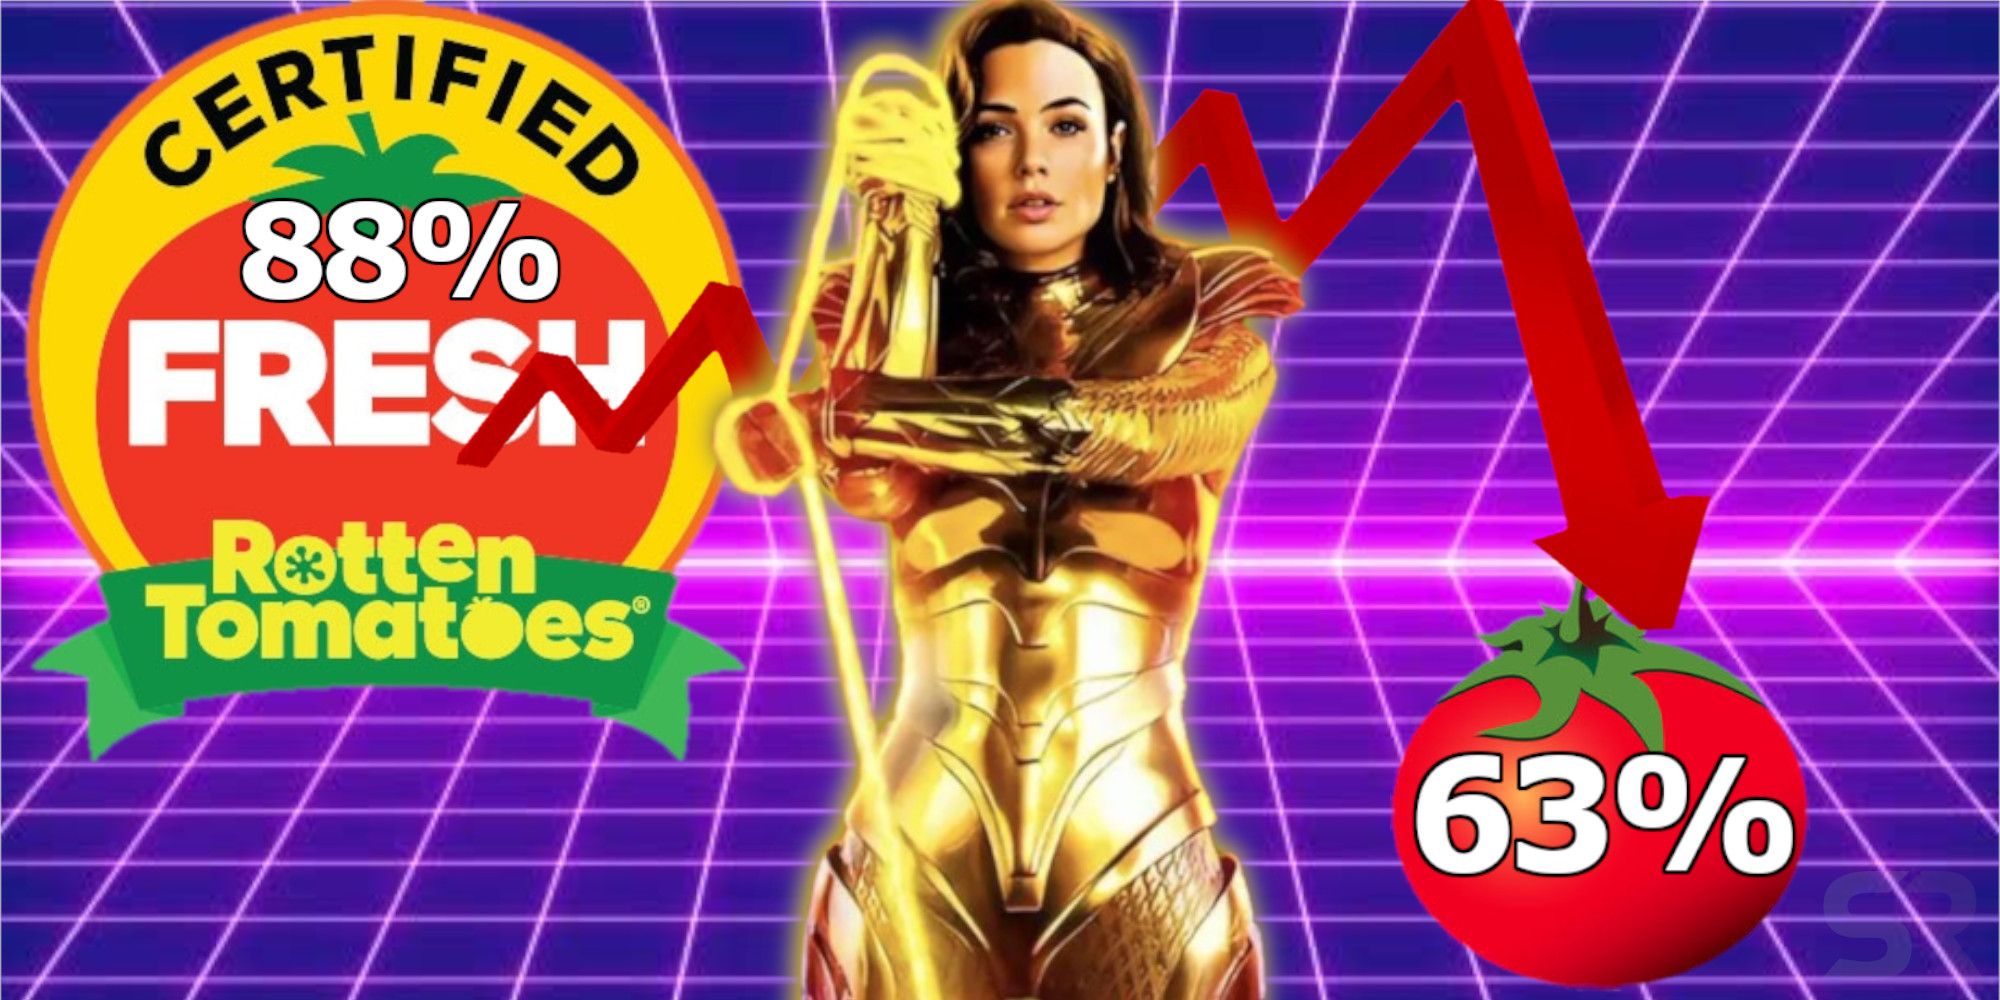 Wonder Woman 1984s Release Highlights Major Rotten Tomatoes Flaws